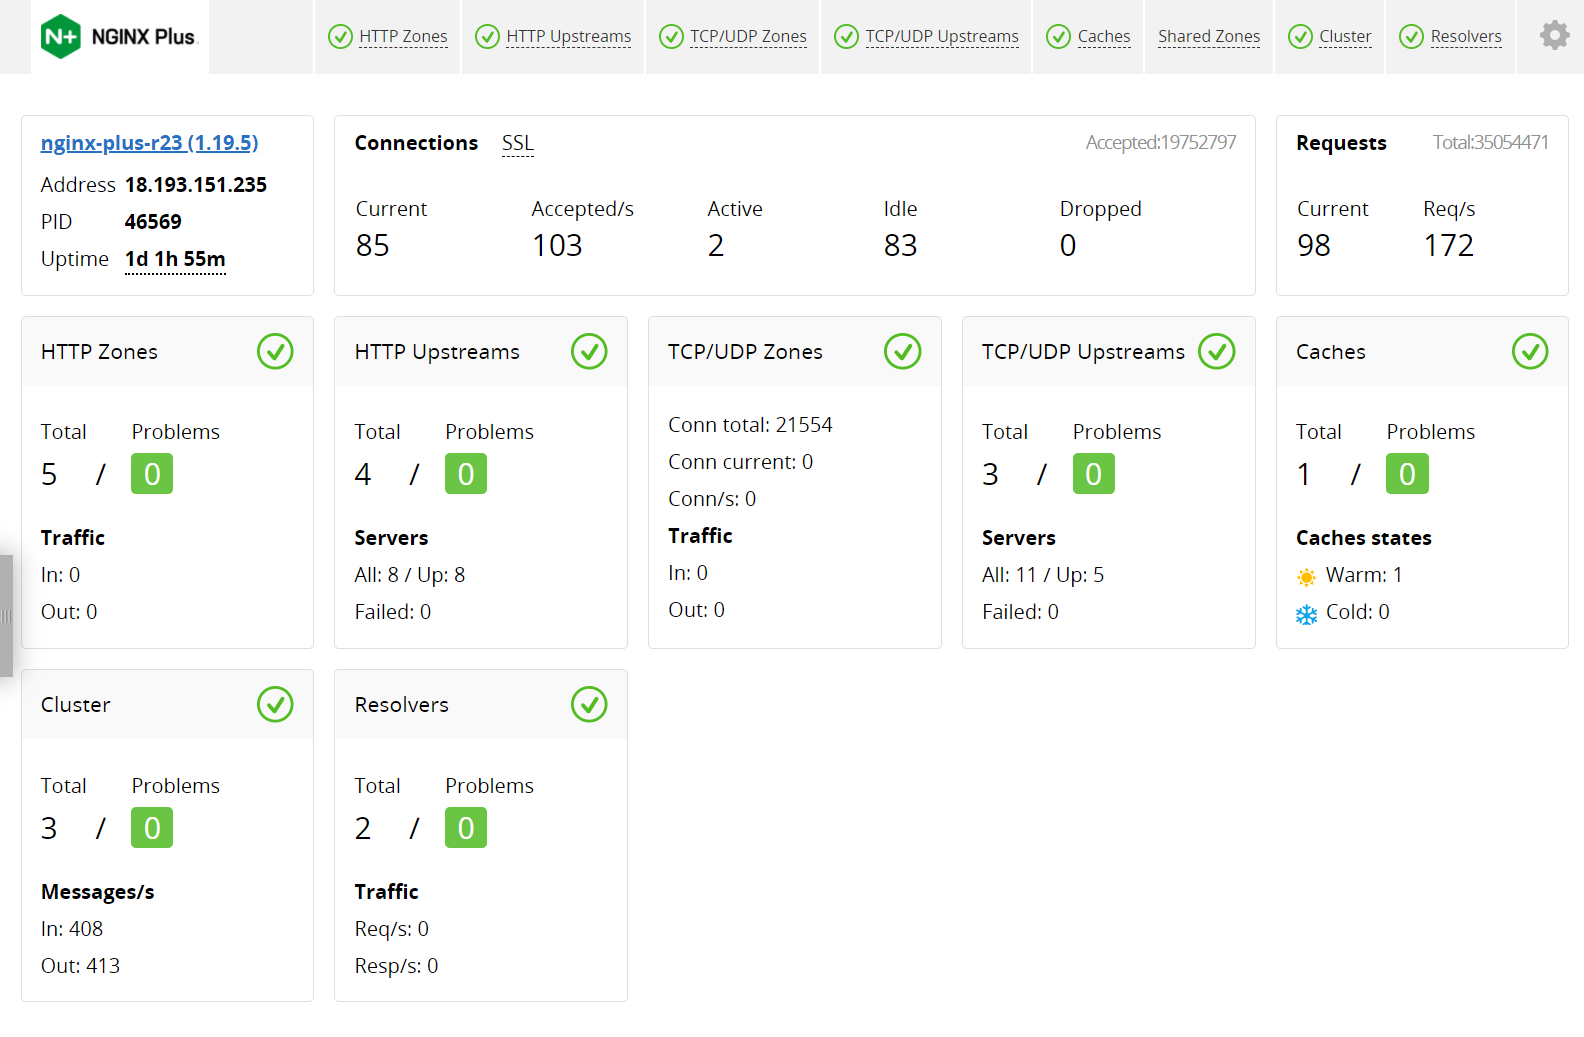 nginx-plus-dashboard-R23-overview.png